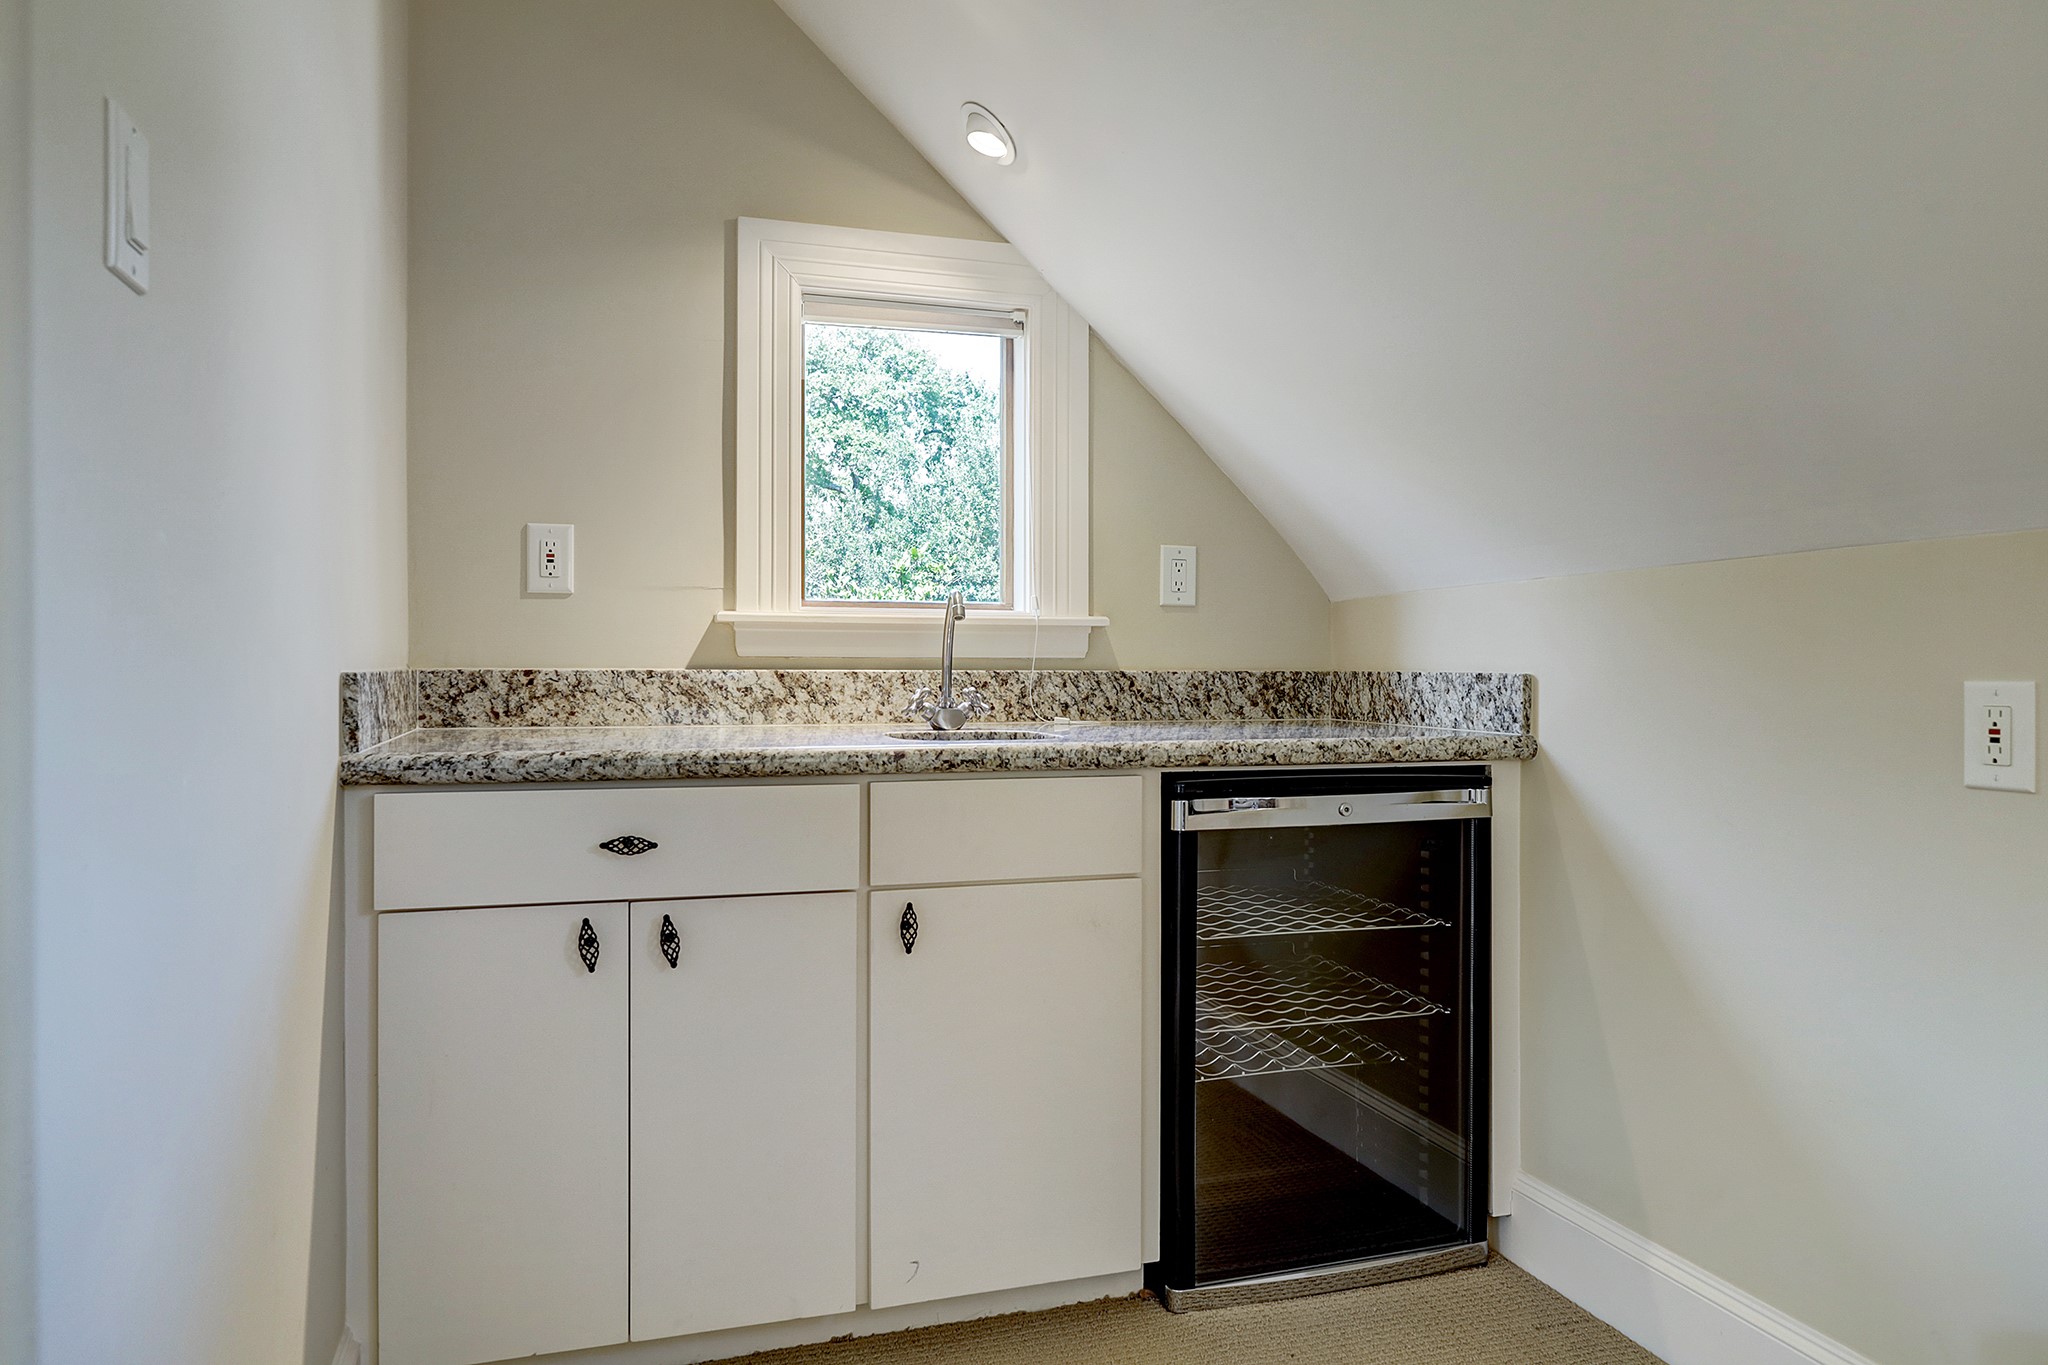 Game Room boasts a Kitchenette too!